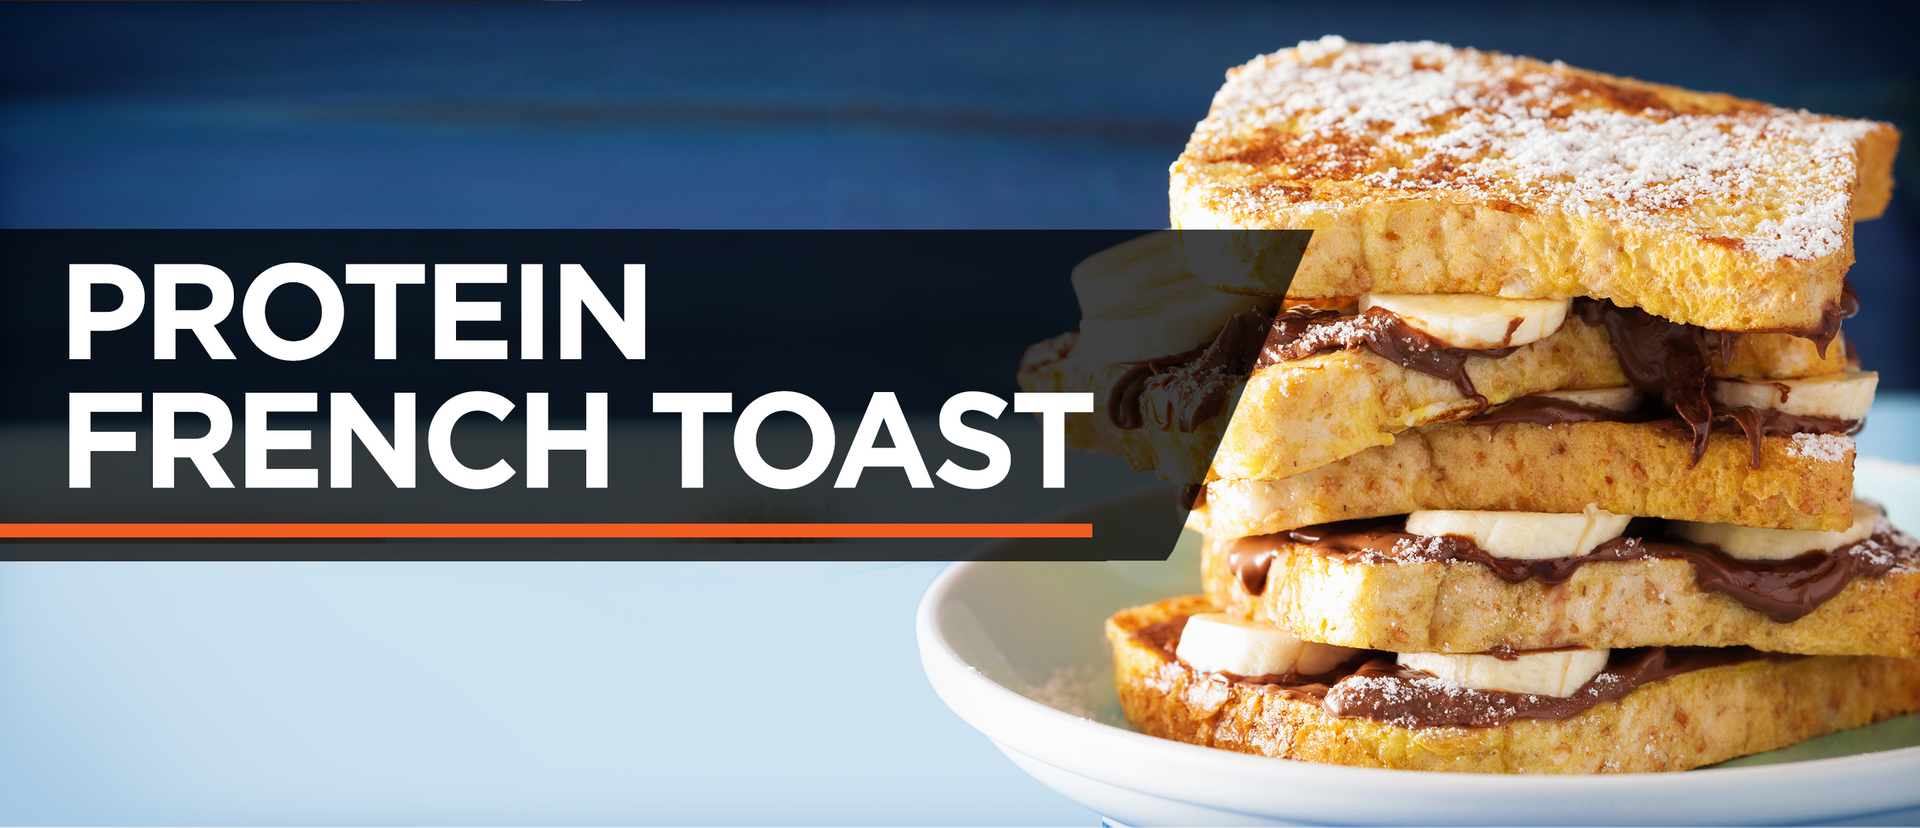 R1 PROTEIN FRENCH TOAST